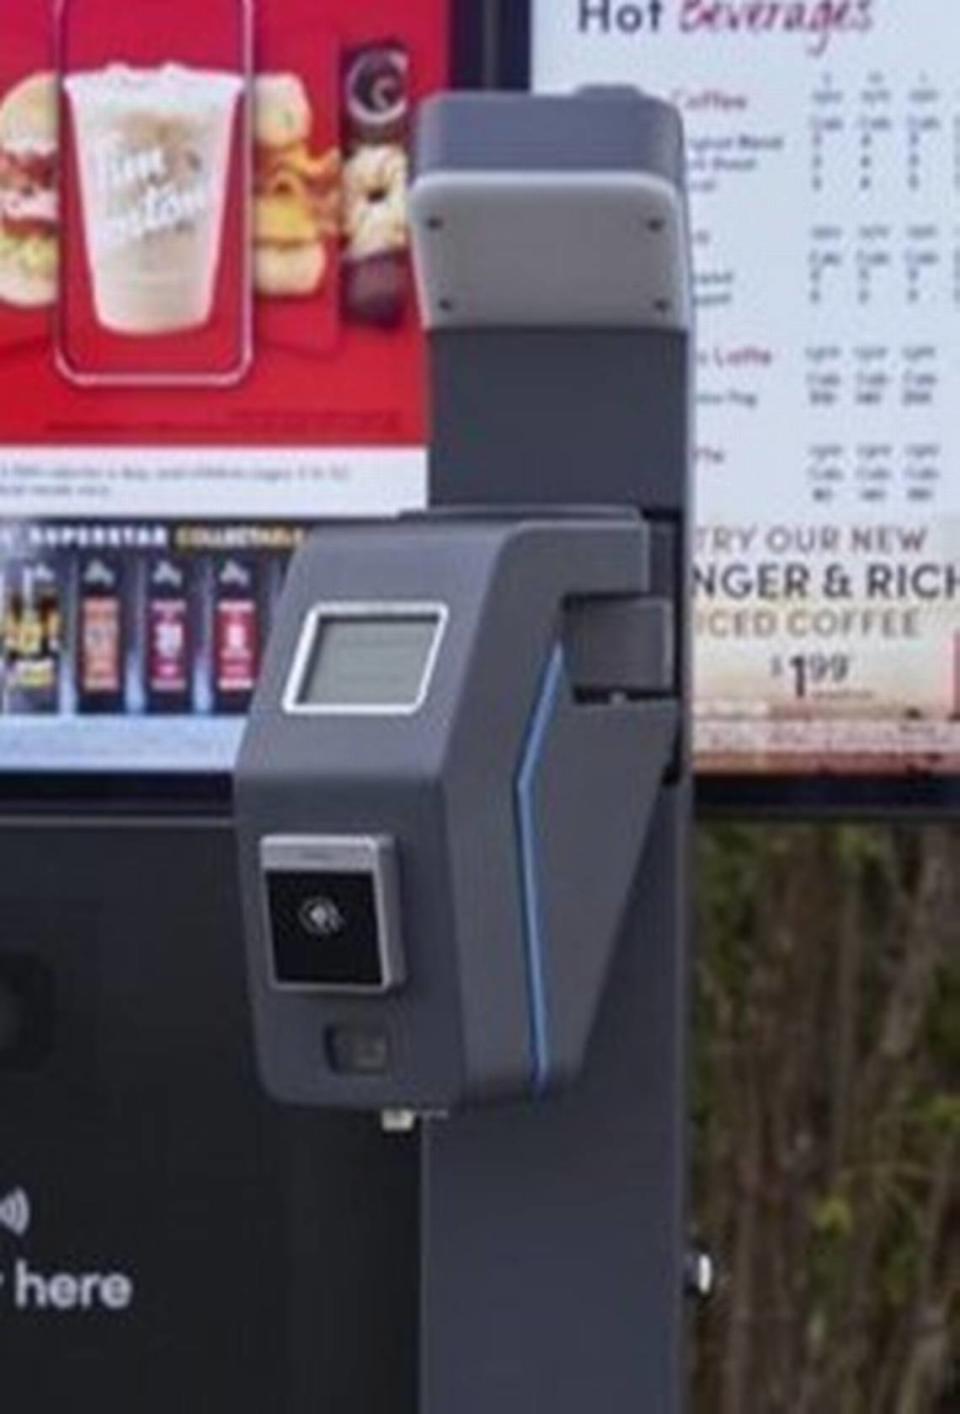 Restaurant Brands International is testing a loyalty scanning and contactless payment reader at a Tim Hortons location. (CNW Group/Restaurant Brands International Inc.)